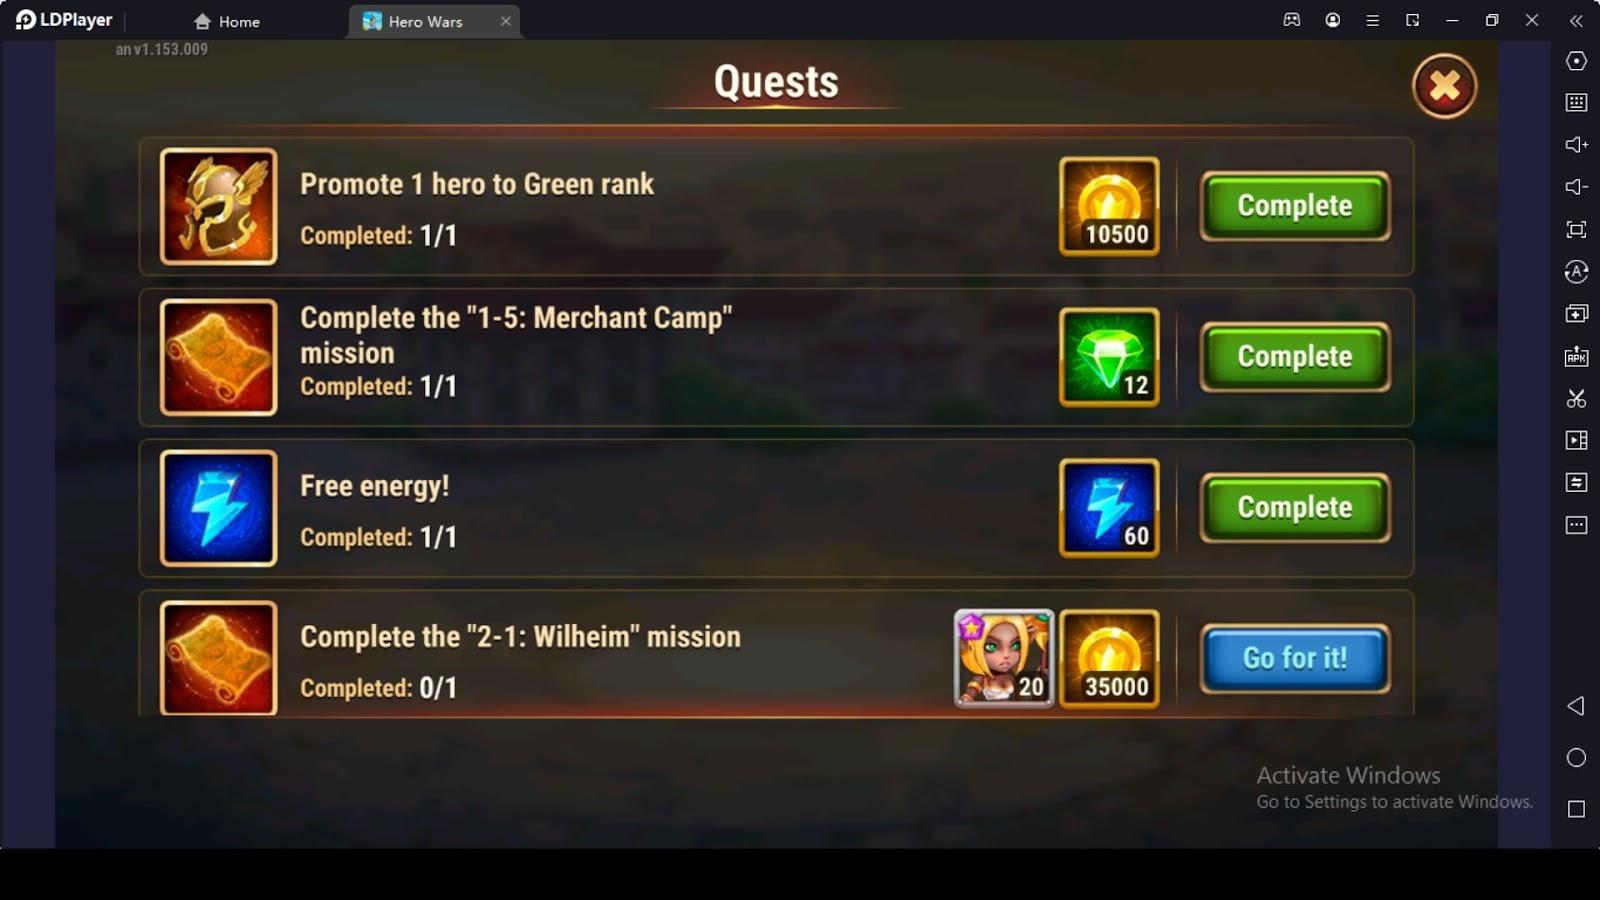 Hero Wars - Fantasy Battles Quests and Daily Quests